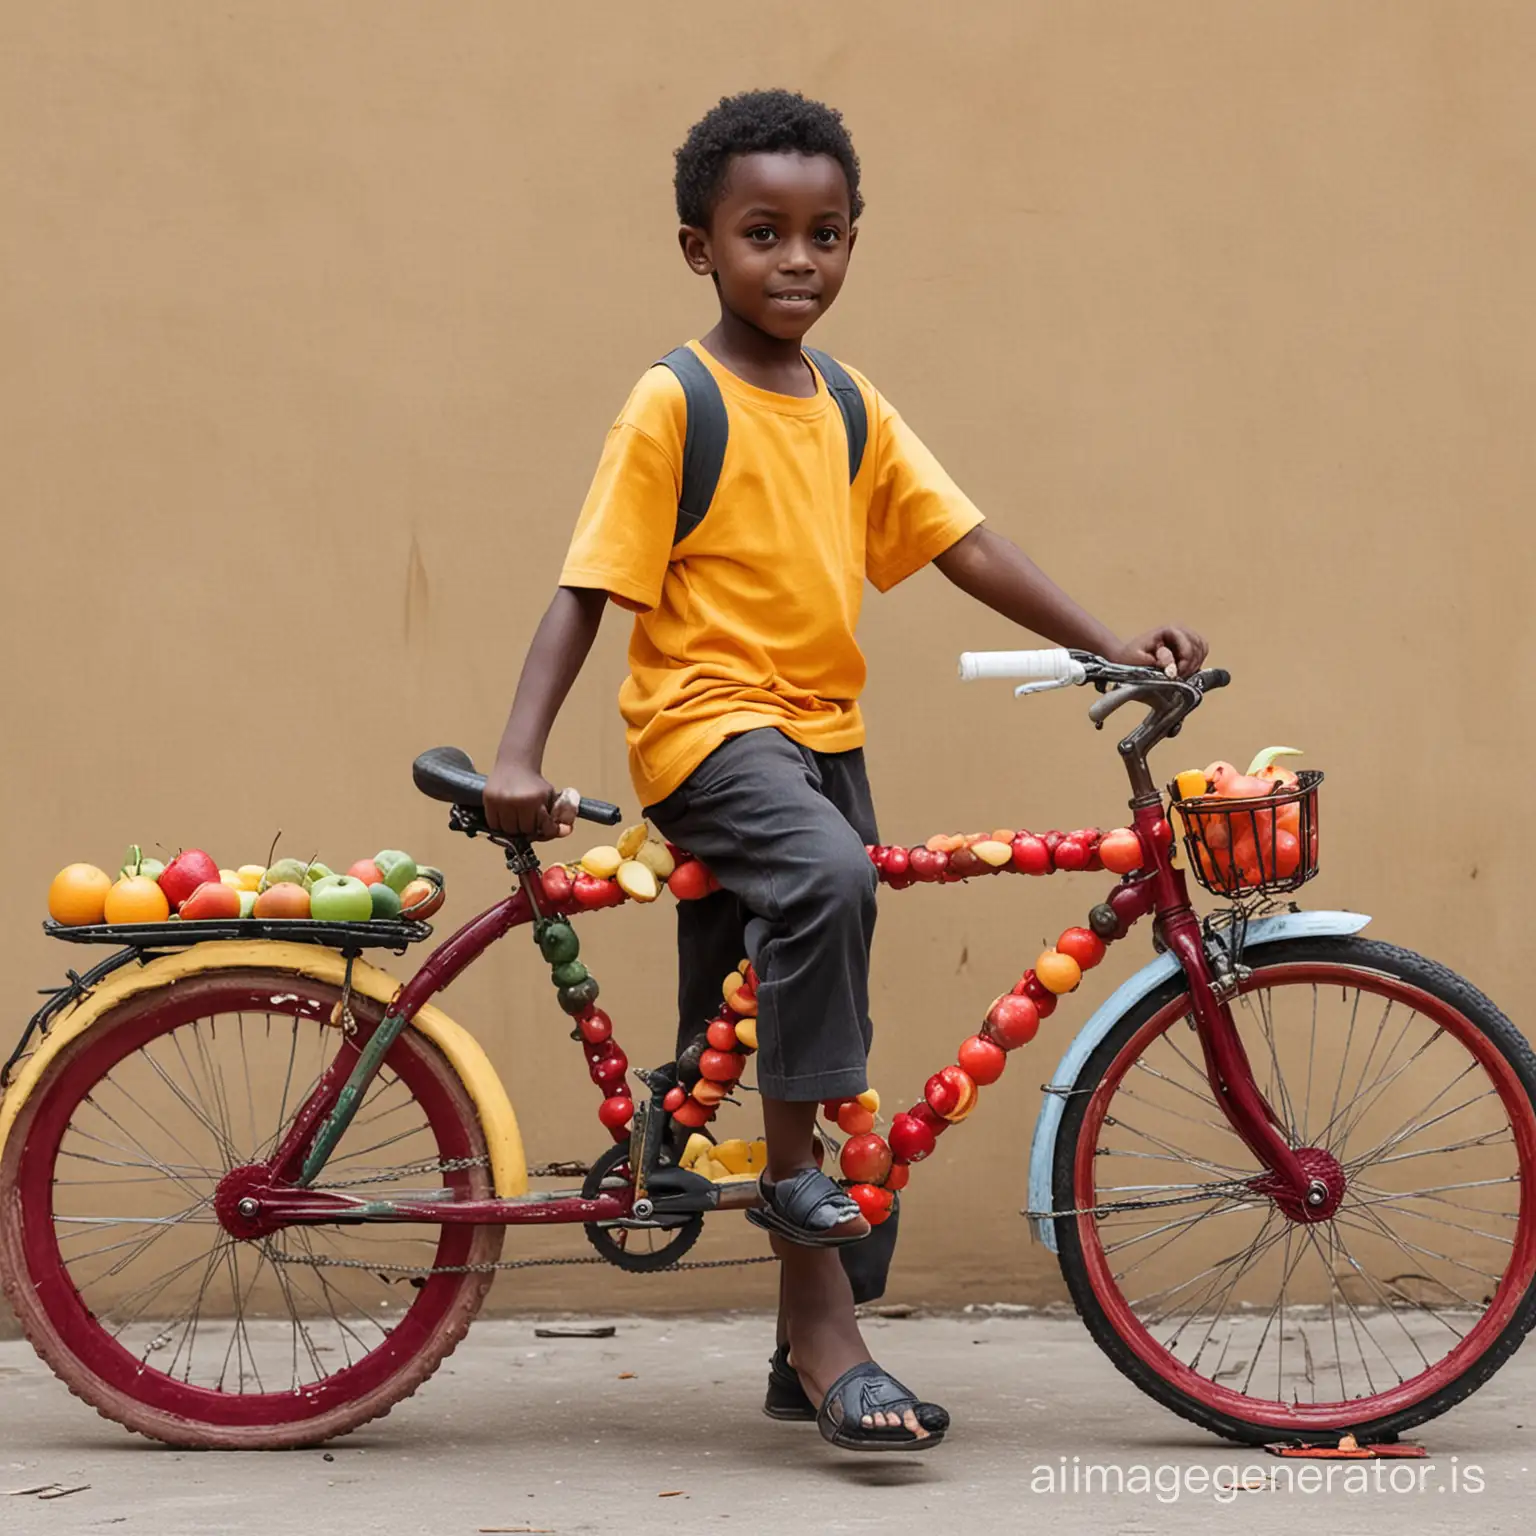 Creative-AfricanAmerican-Boy-Crafting-Fruit-Bicycle